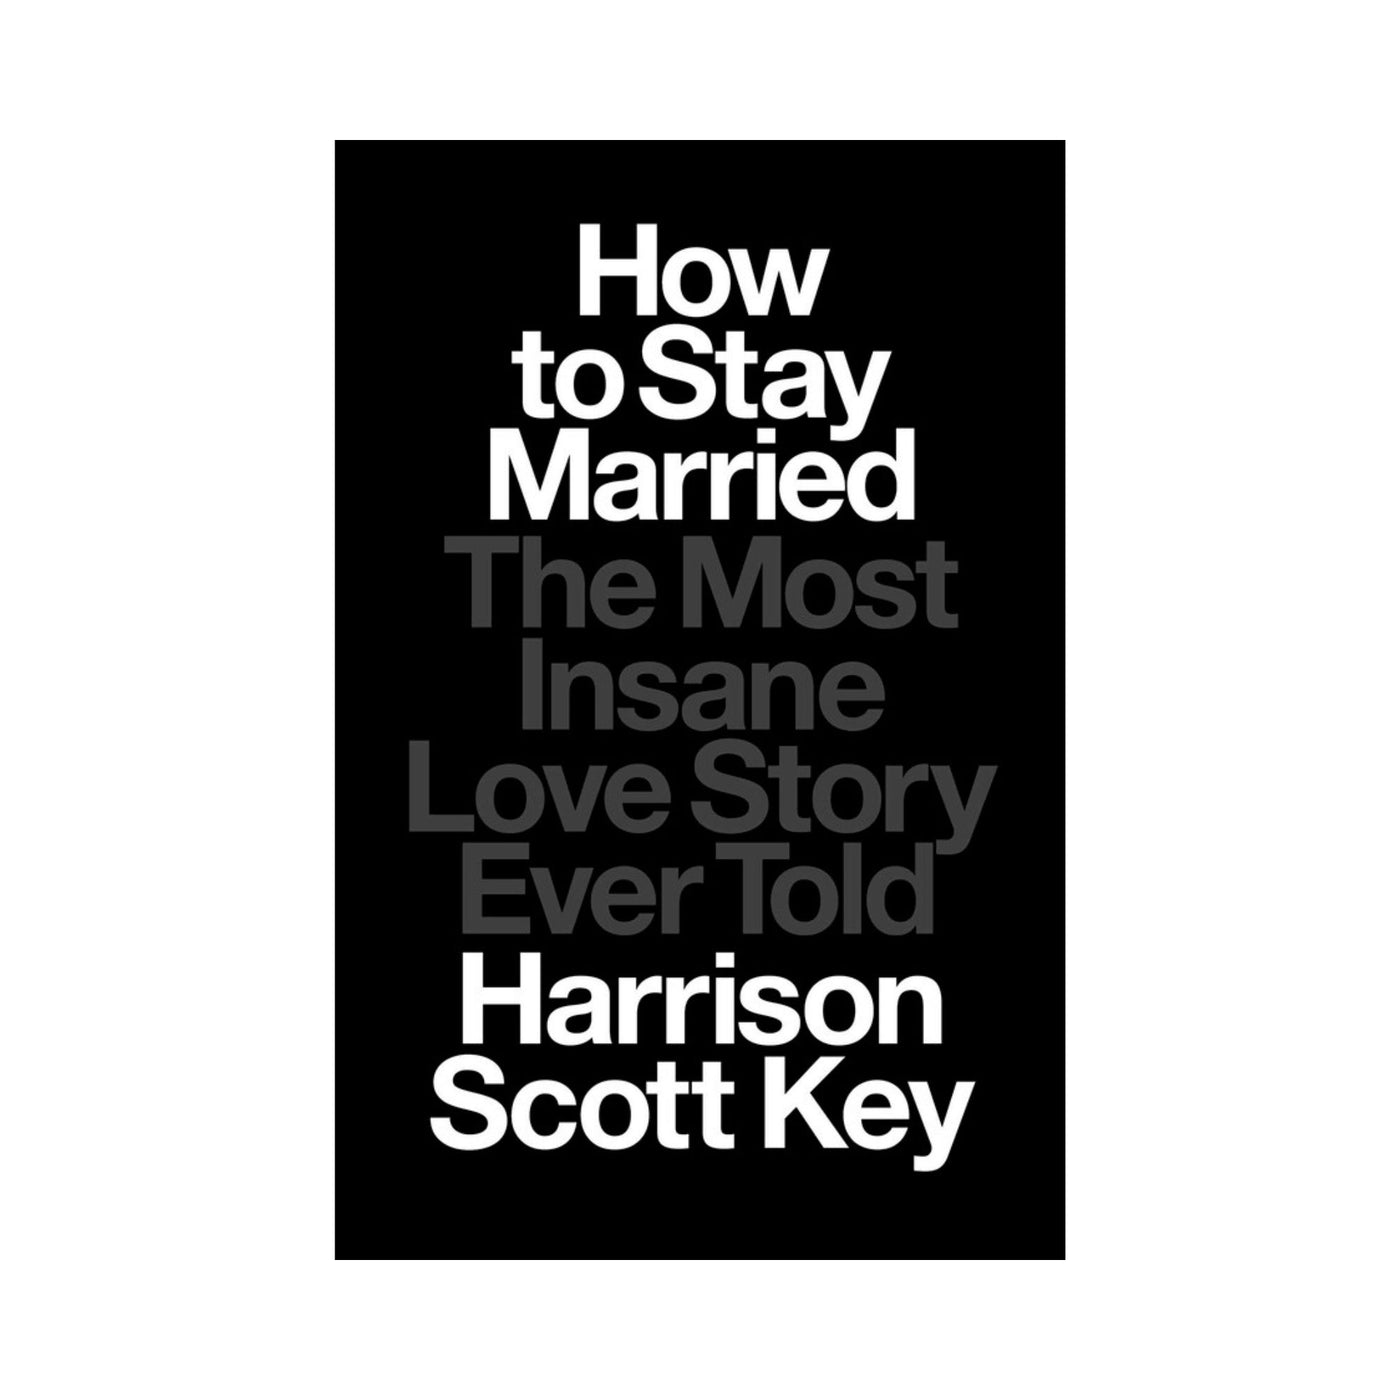 How to Stay Married: The Most Insane Love Story Ever Told by Harrison Scott Key (Signed Copy)